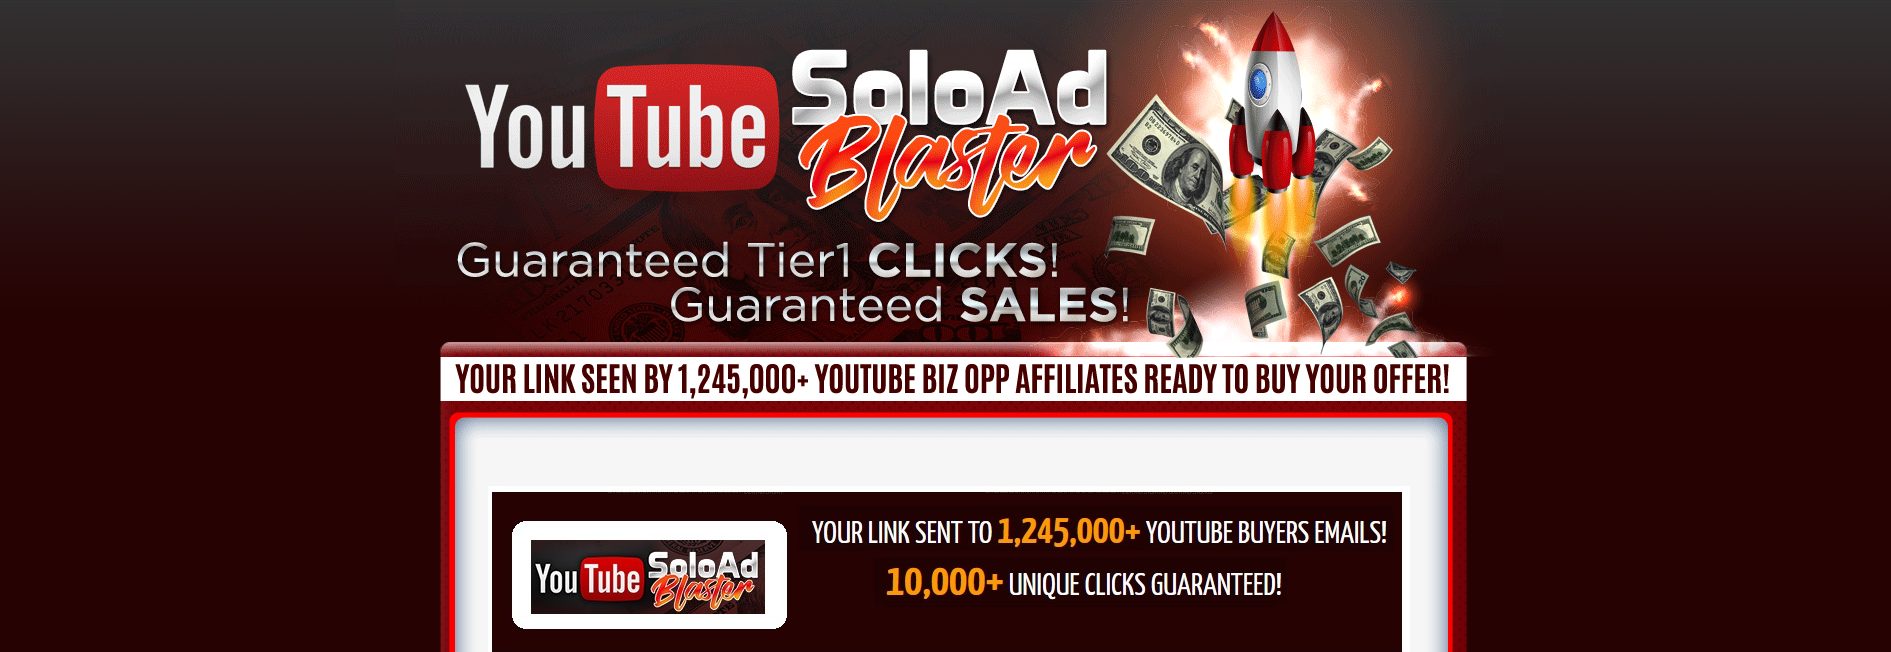 YouTube Solo Ad Blaster review